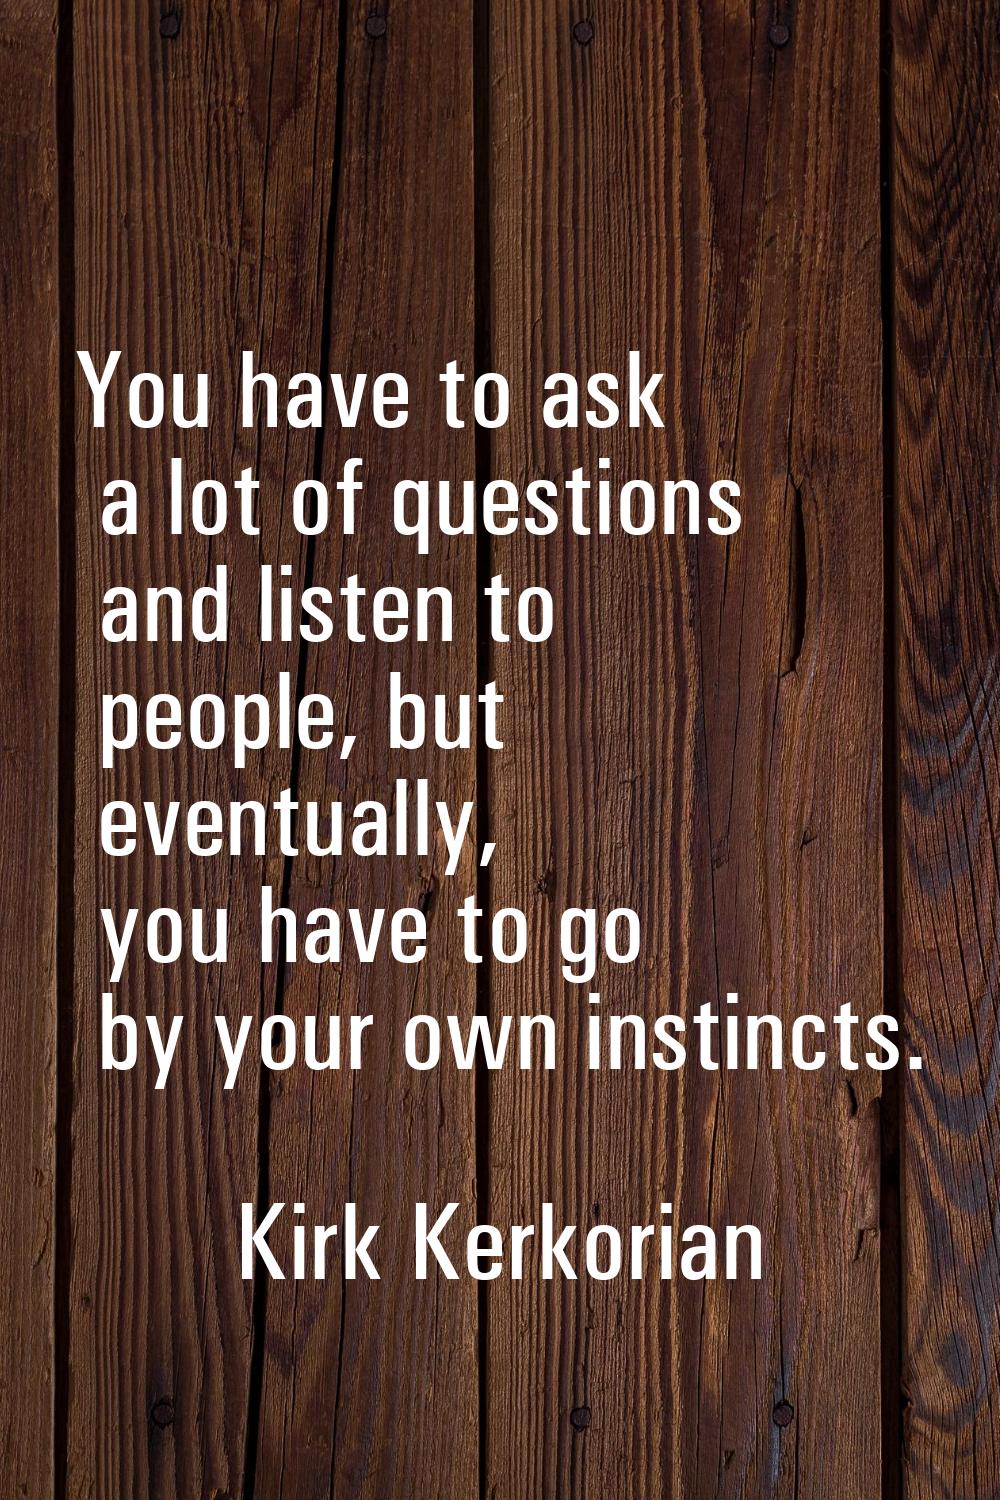 You have to ask a lot of questions and listen to people, but eventually, you have to go by your own